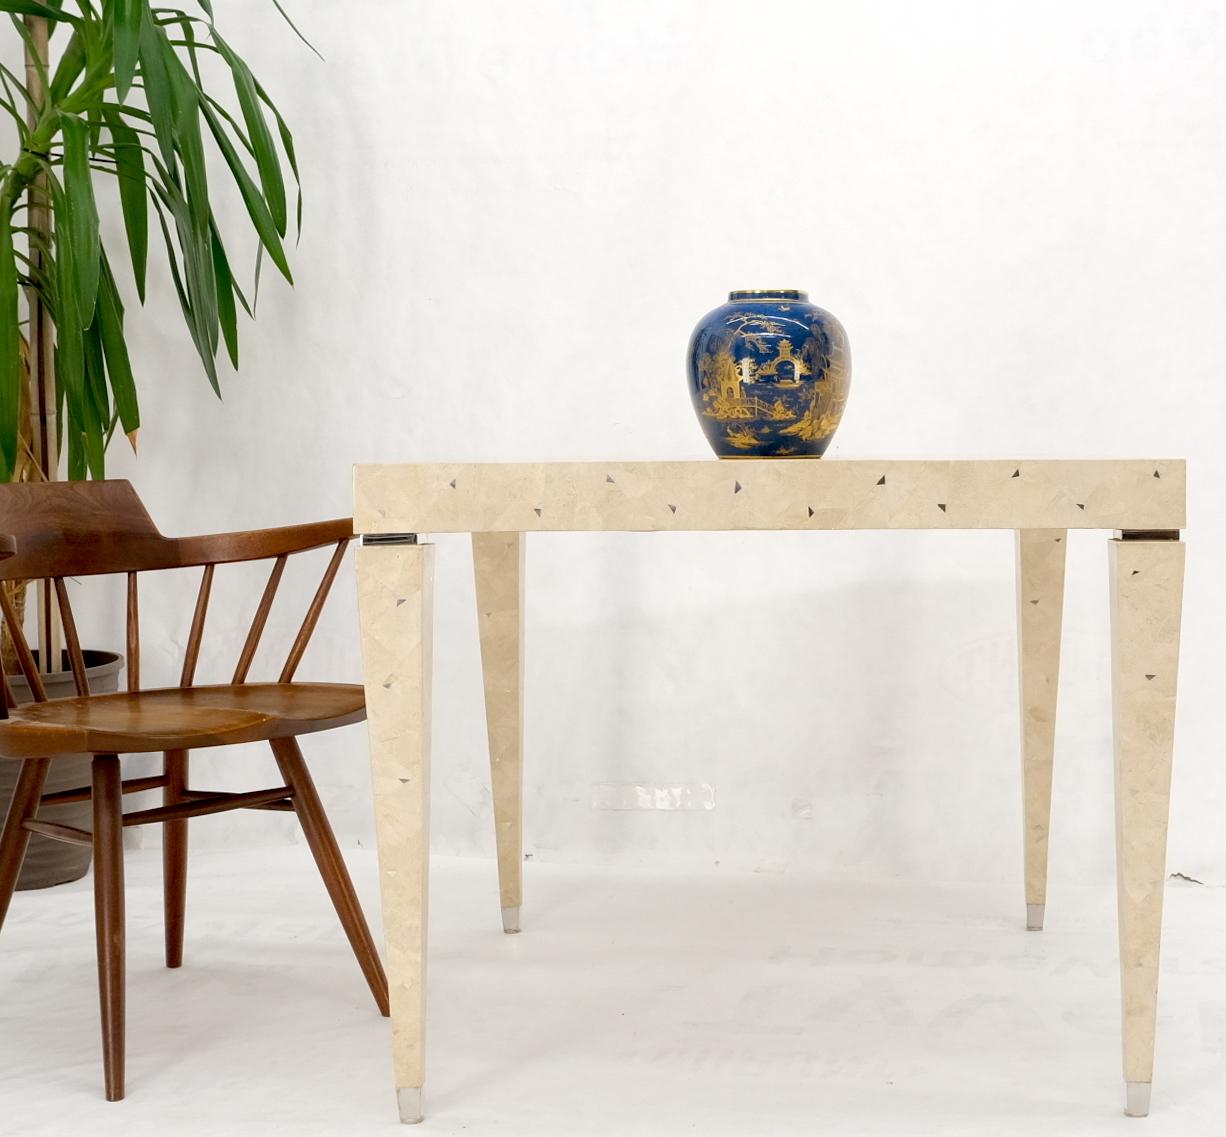 Philippine Tessellated Stone & Mirrors Square Mid-Century Modern Dining Game Table